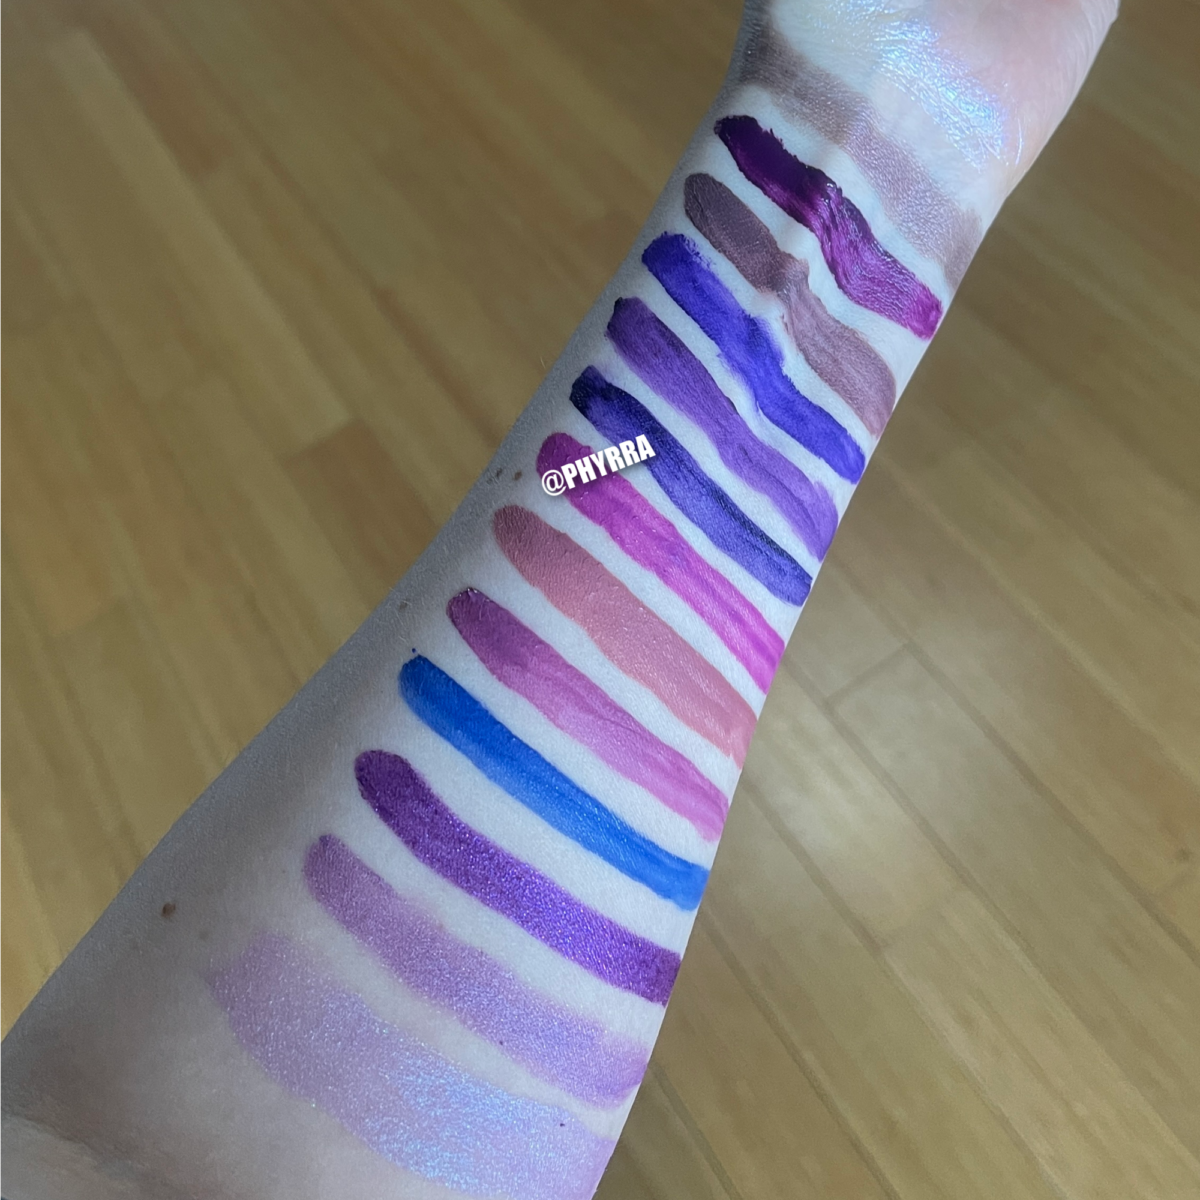 purple lipstick and lipgloss swatches on pale skin